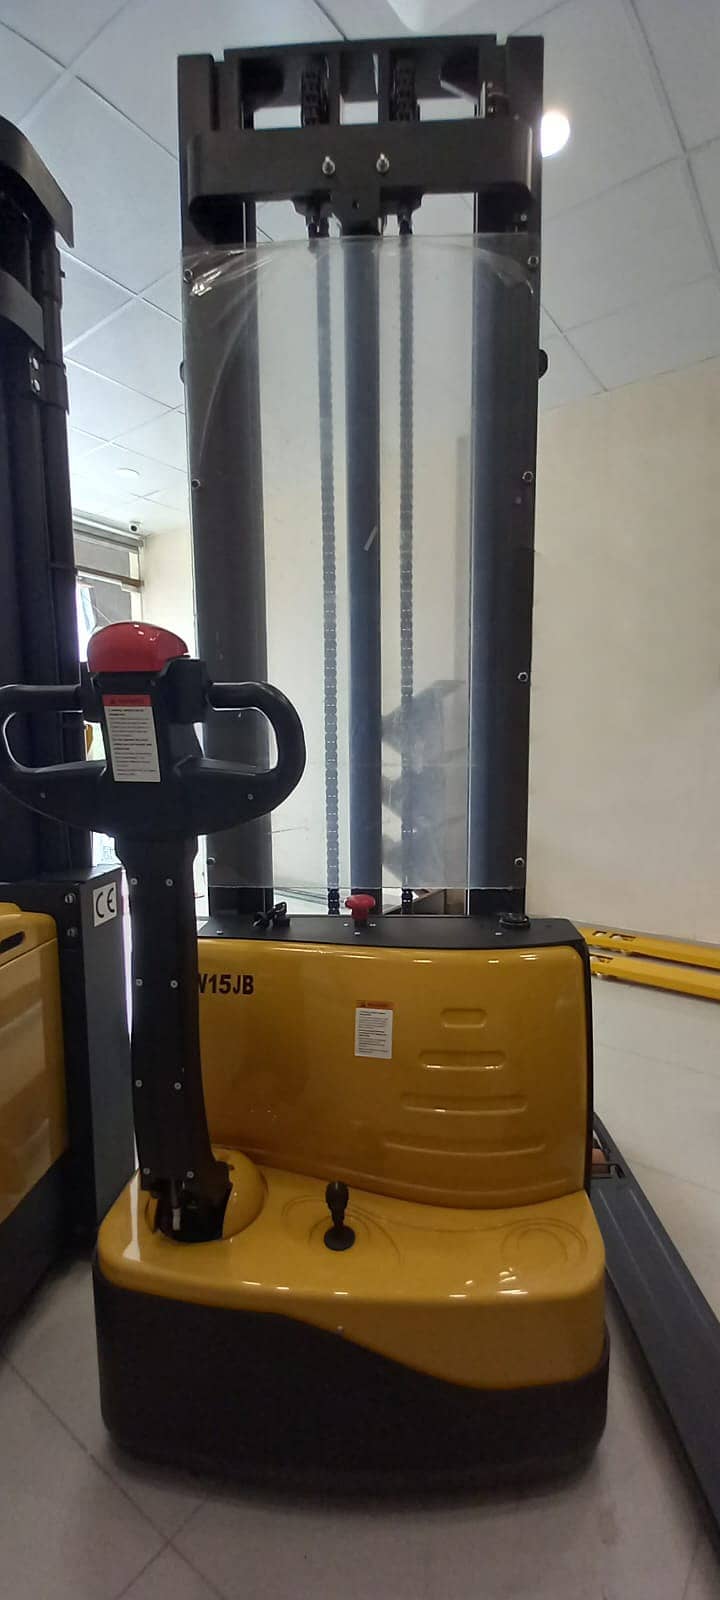 electrical forklifter, manual stacker, battery lifter, manual lifter 3